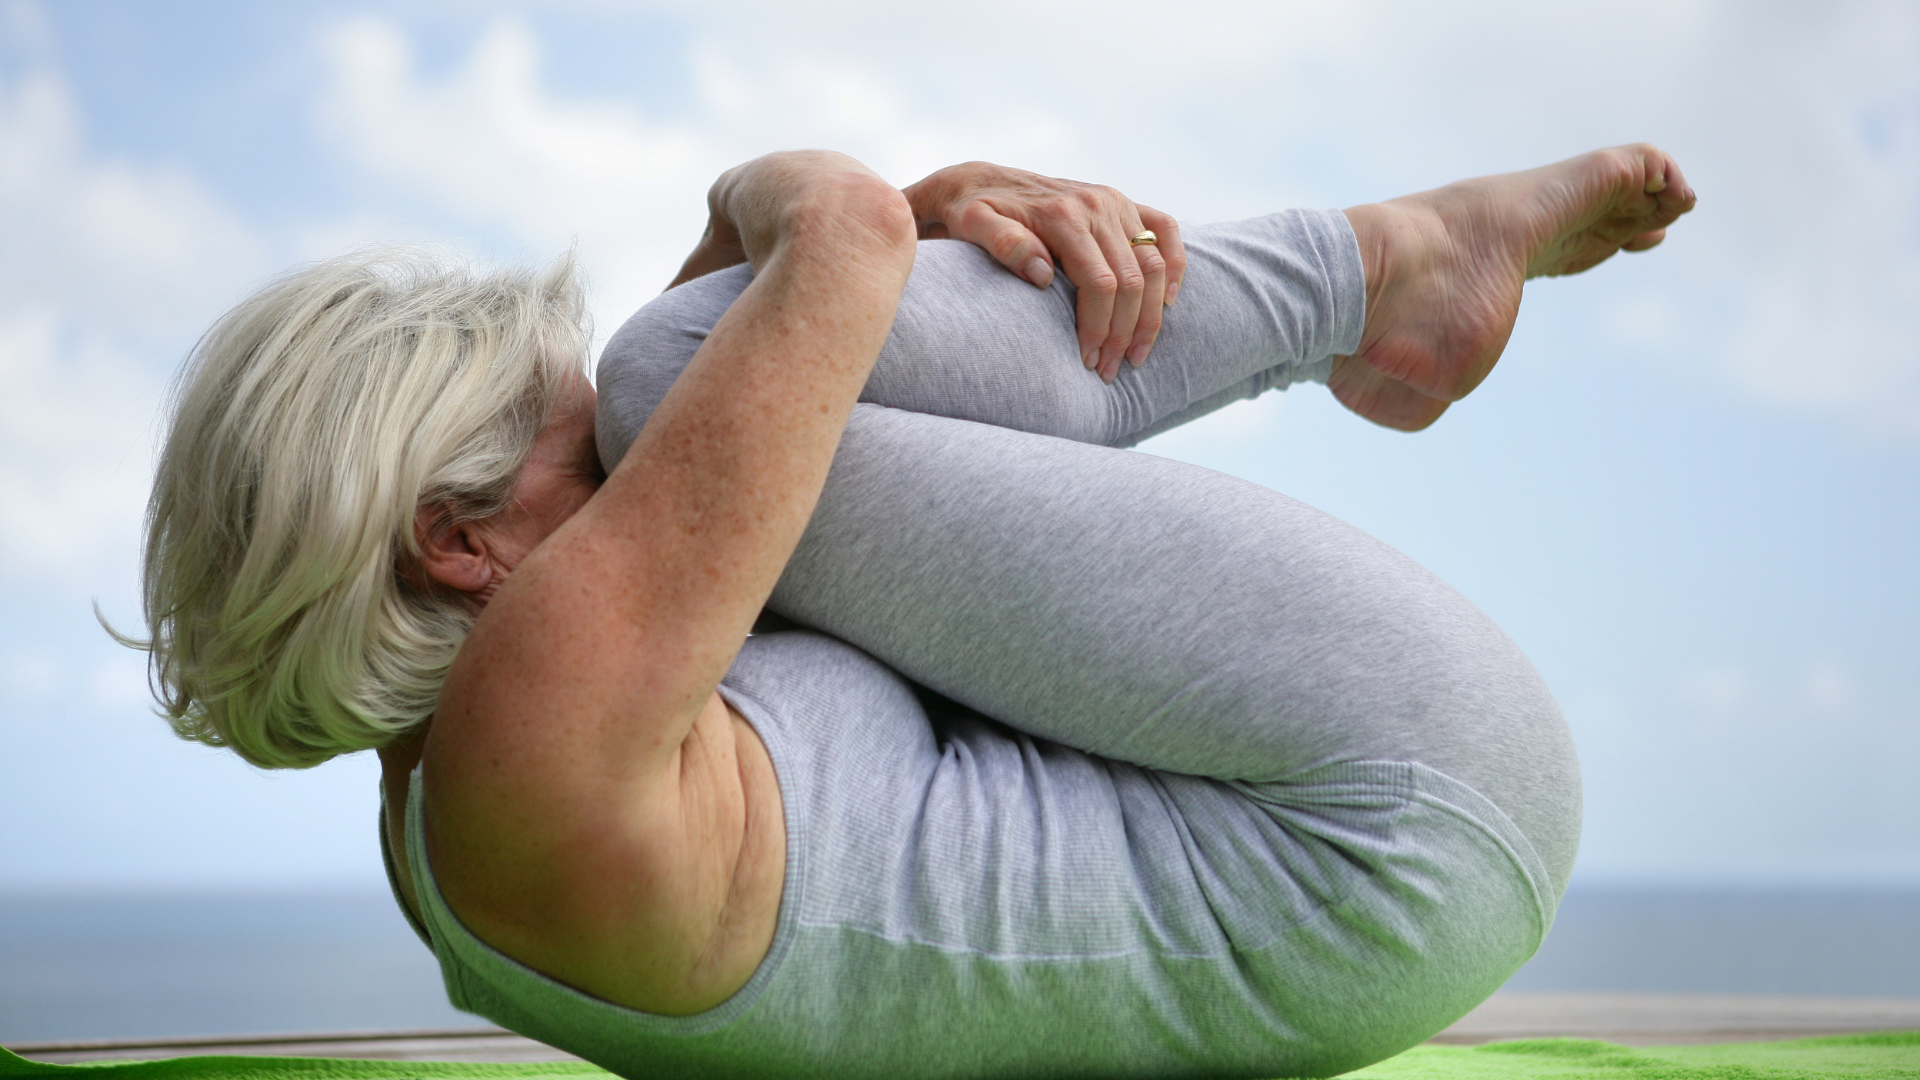 Woman holding a yoga position depicting how yoga has become a complementary therapy for alleviating pain and stress for individuals with breast cancer also reduction of inflammatory biomarkers